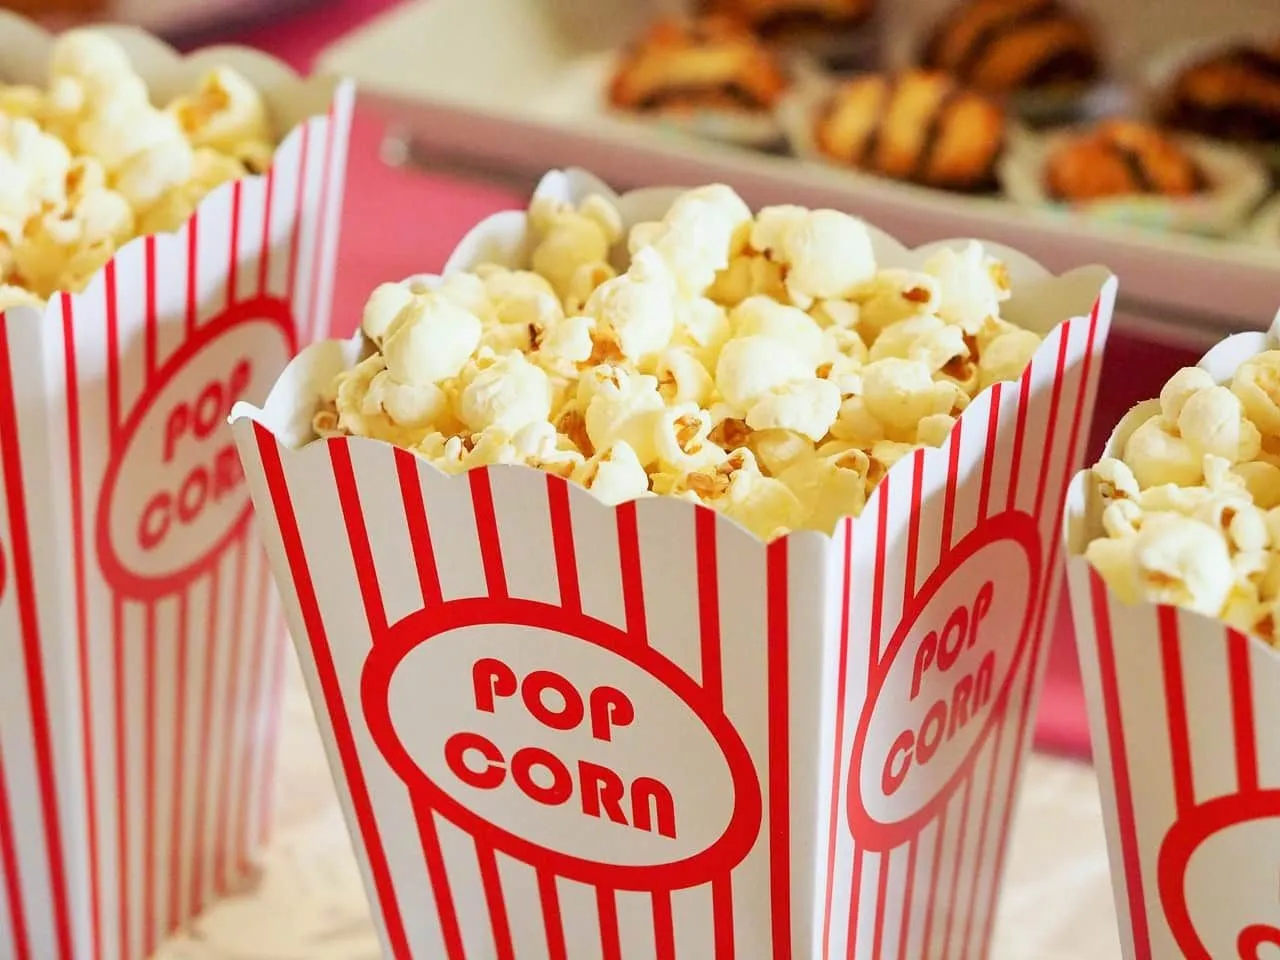 Joking about popcorn in the movies is a money move.